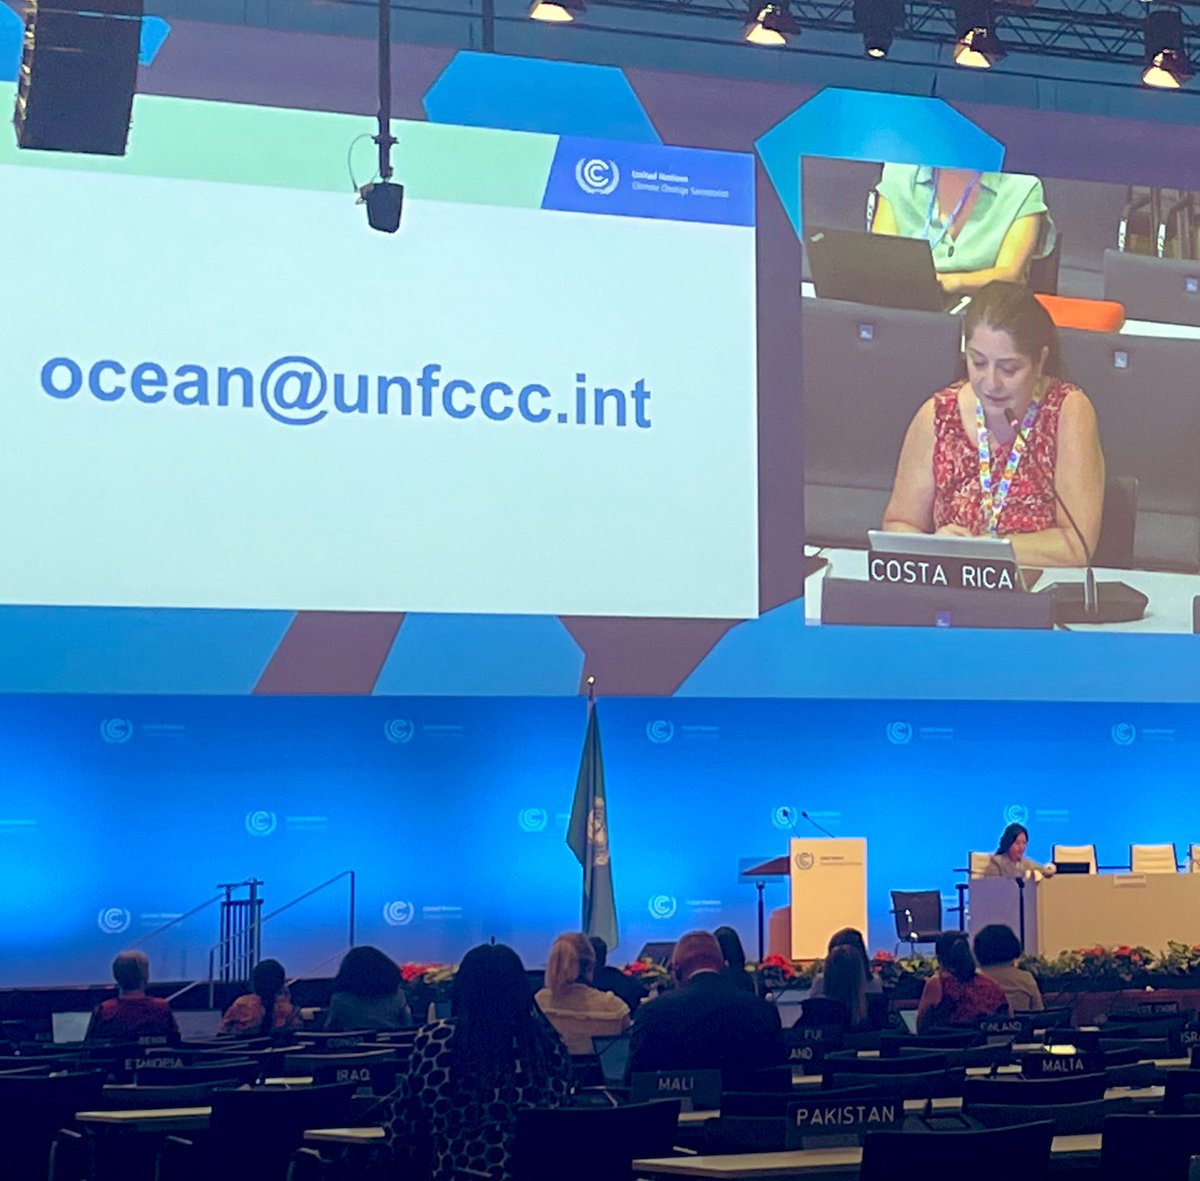 Closing statements of @UNFCCC 2023 #OceanClimateDialogue

Gov. of Costa Rica highlights NDC commitments to protect & restore wetlands, including expansion of landmark PES financing scheme to support marine/coastal protections. 

#LeadingByExample 
#OceanClimateAction

@HaydeeRdrz